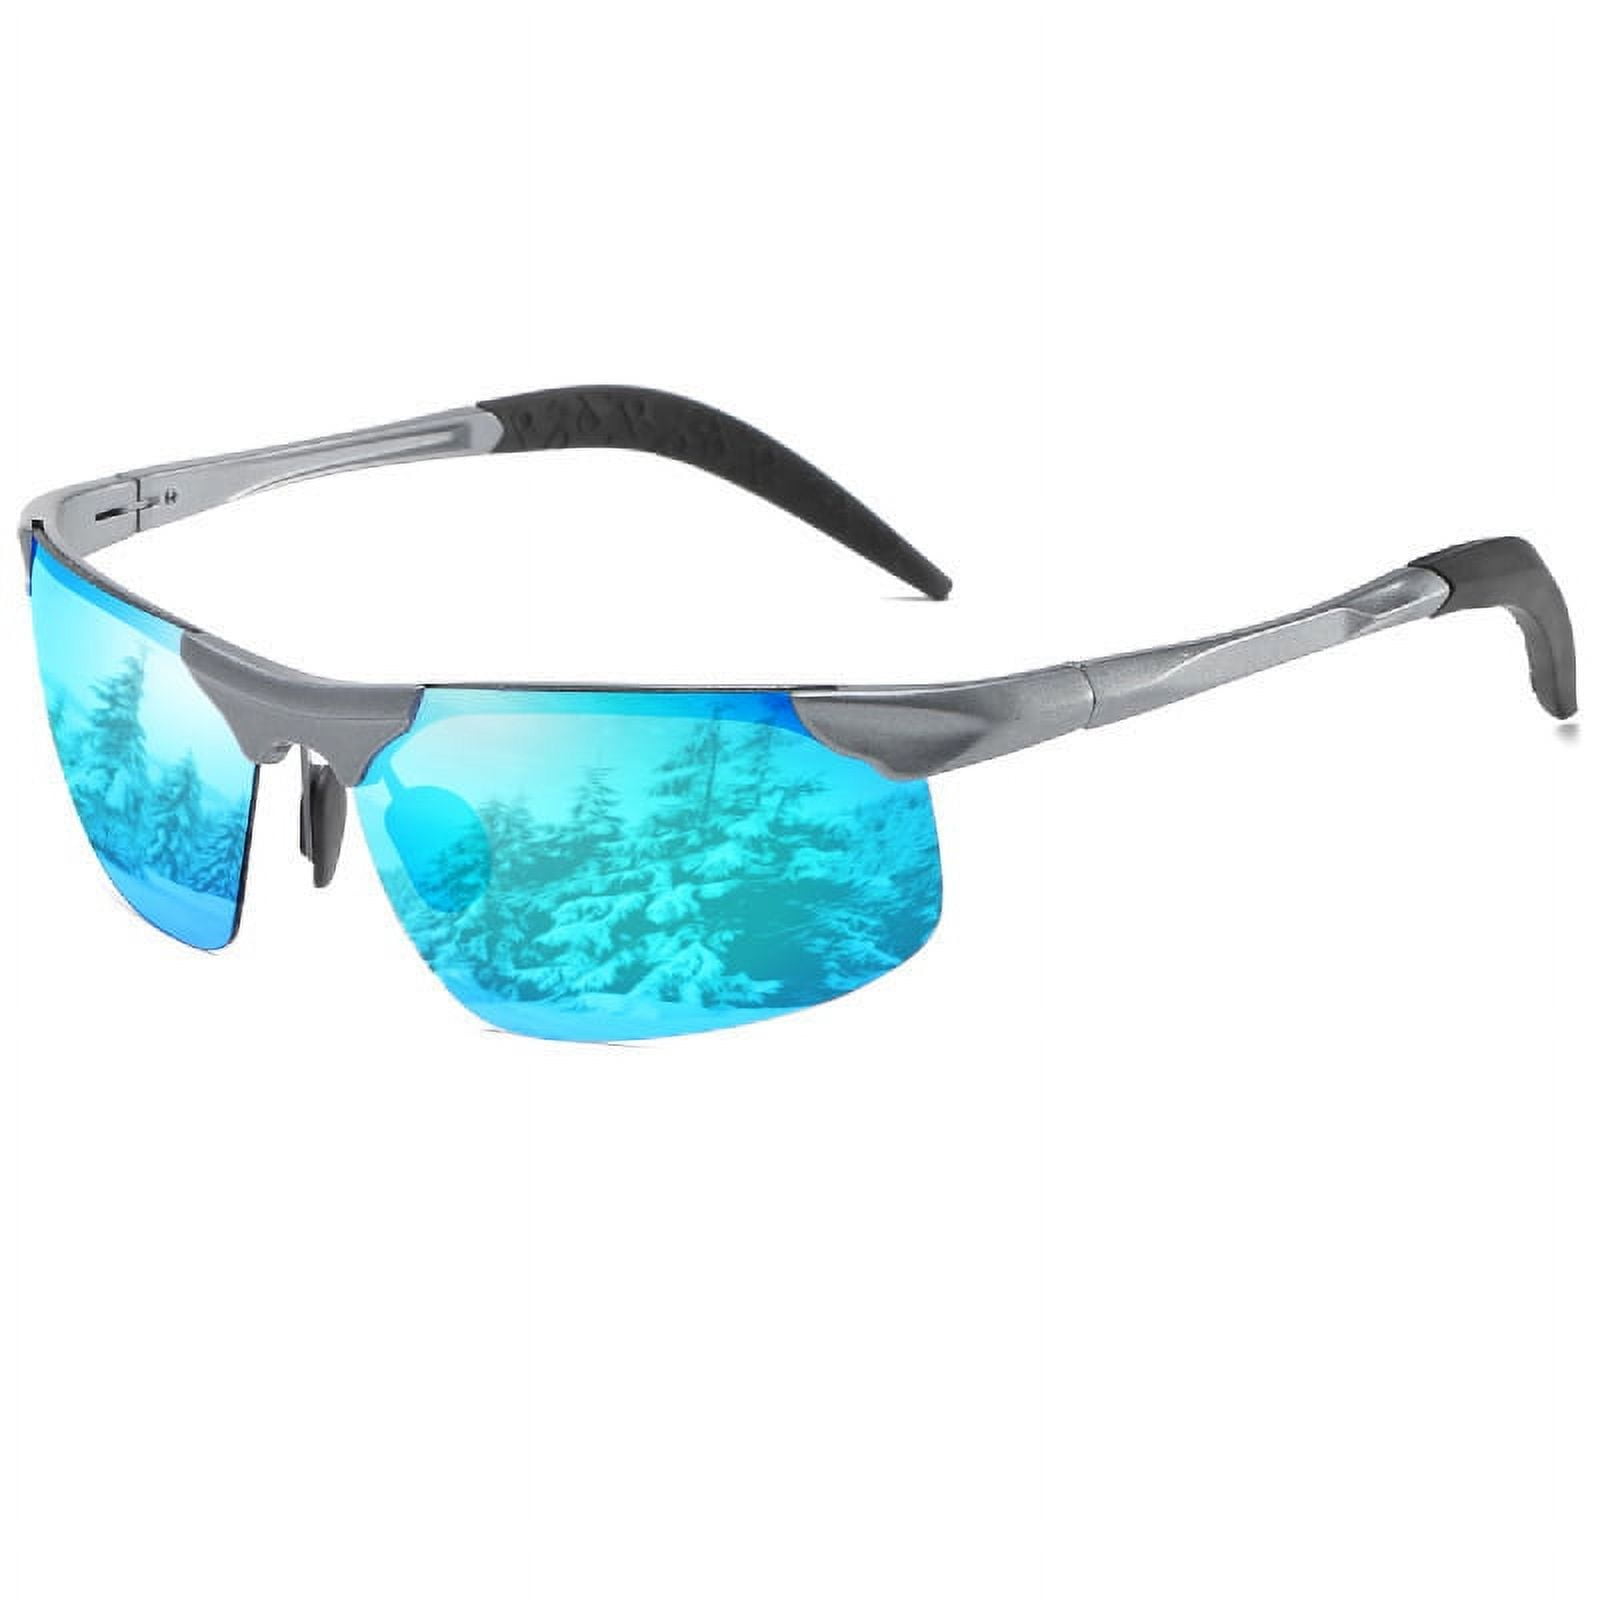 AABV Polarized Sport Sunglasses for Men and Women, Ideal for Driving  Fishing Cycling and Running,UV Protection